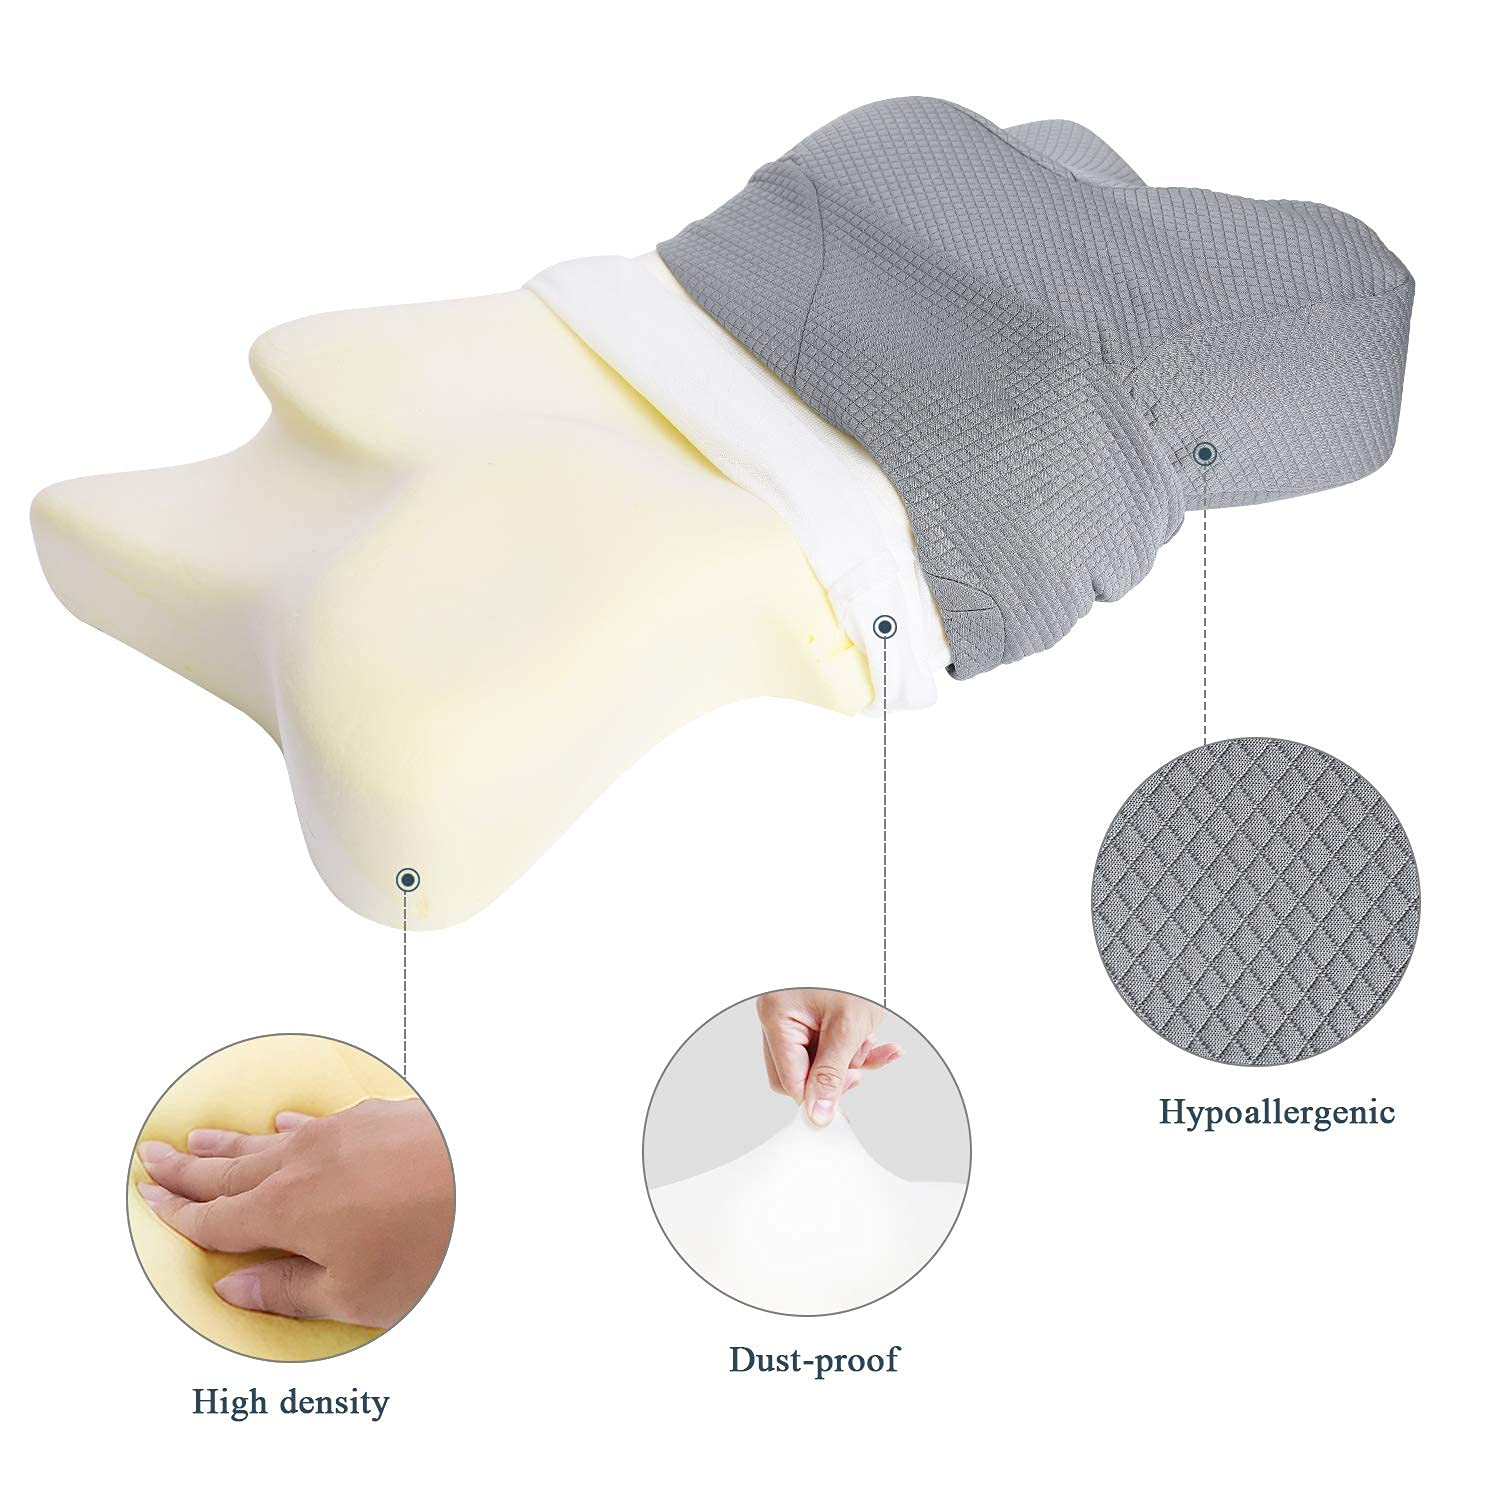 Load image into Gallery viewer, Cervical Pillow Memory Foam Orthopedic Pillow for Neck Pain Relief Ergonomic Pillow for Back Sleepers Side Sleepers and Stomach Sleepers
